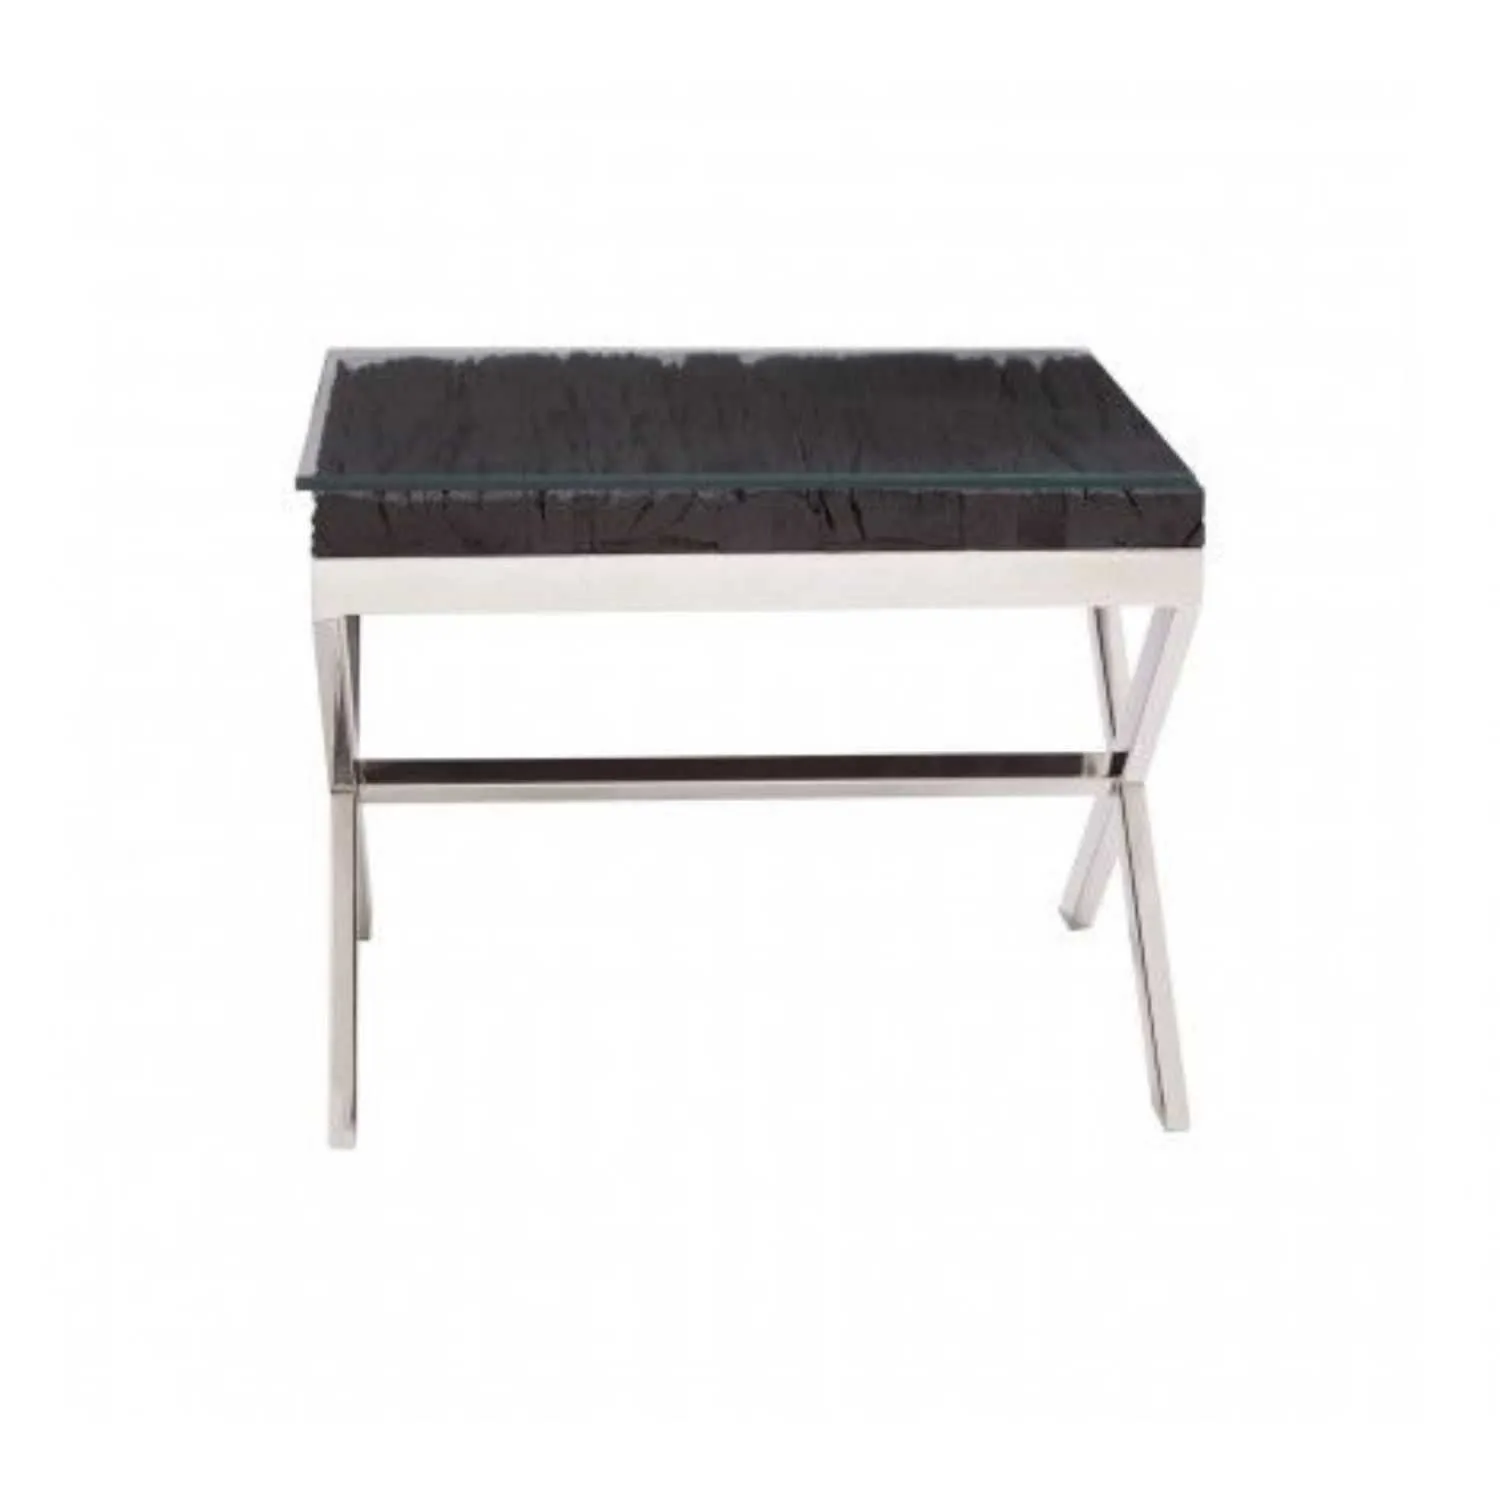 Kerela End Table Black and Glass Steel Legs